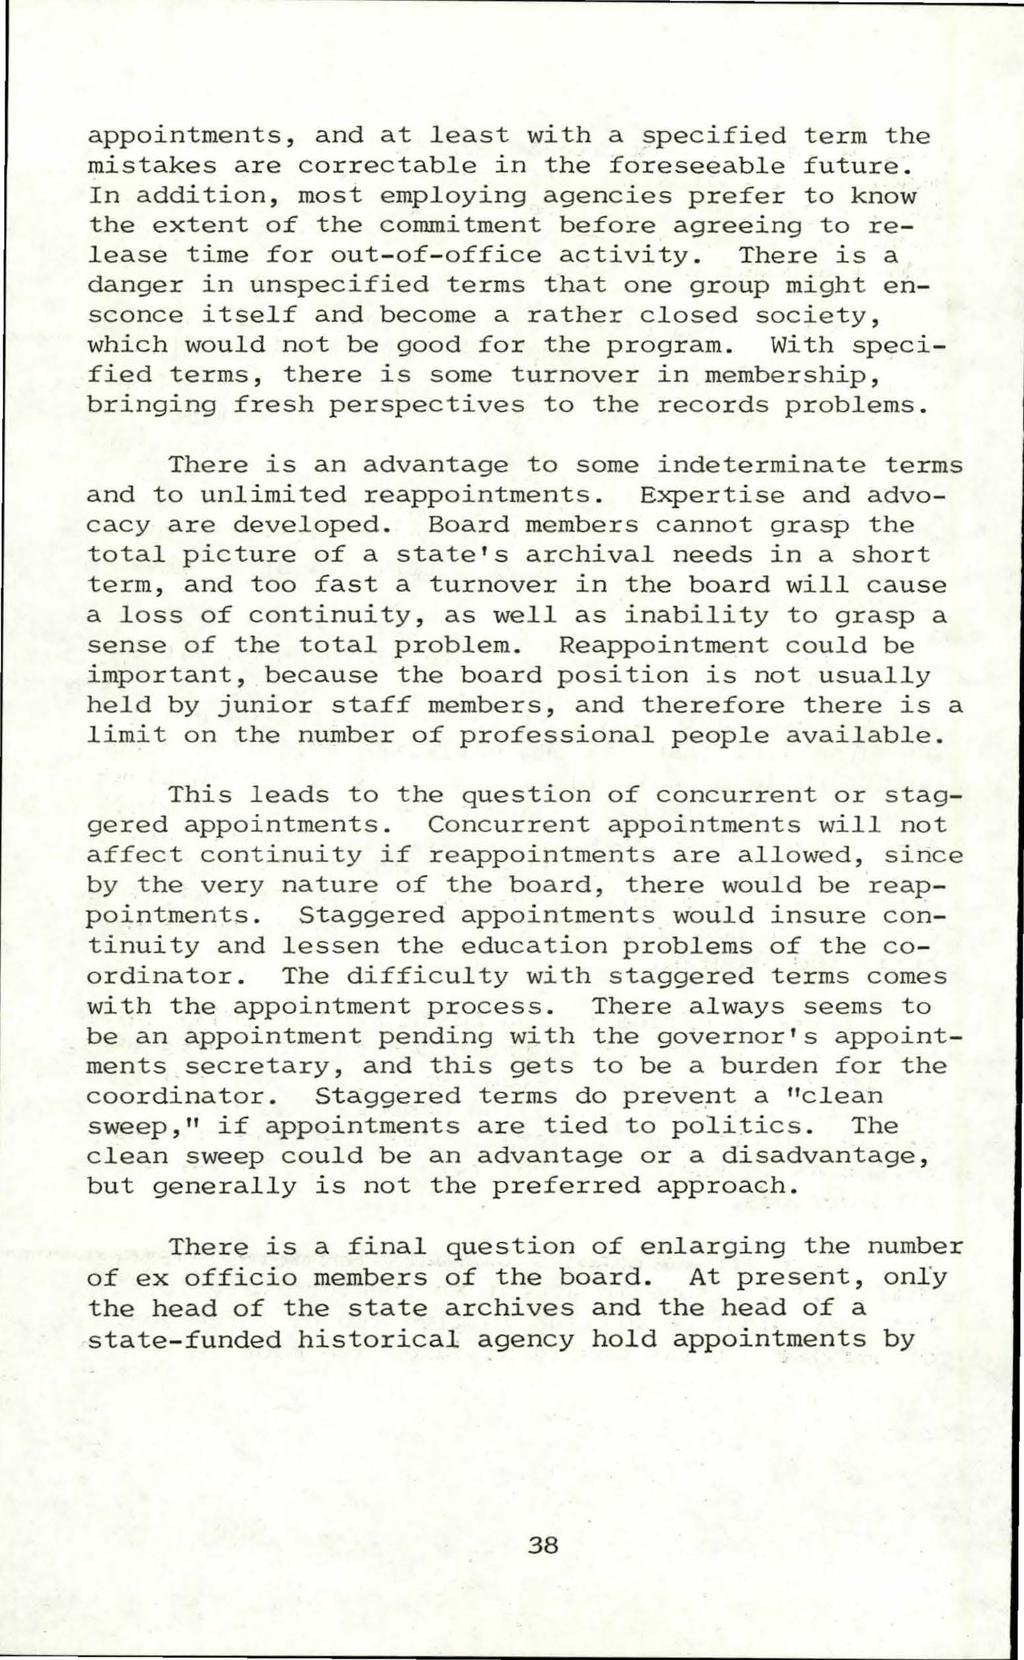 Georgia Archive, Vol. 9 [1981], No. 1, Art. 5 appointments, and at least with a specified term the mistakes are correctable in the foreseeable future.